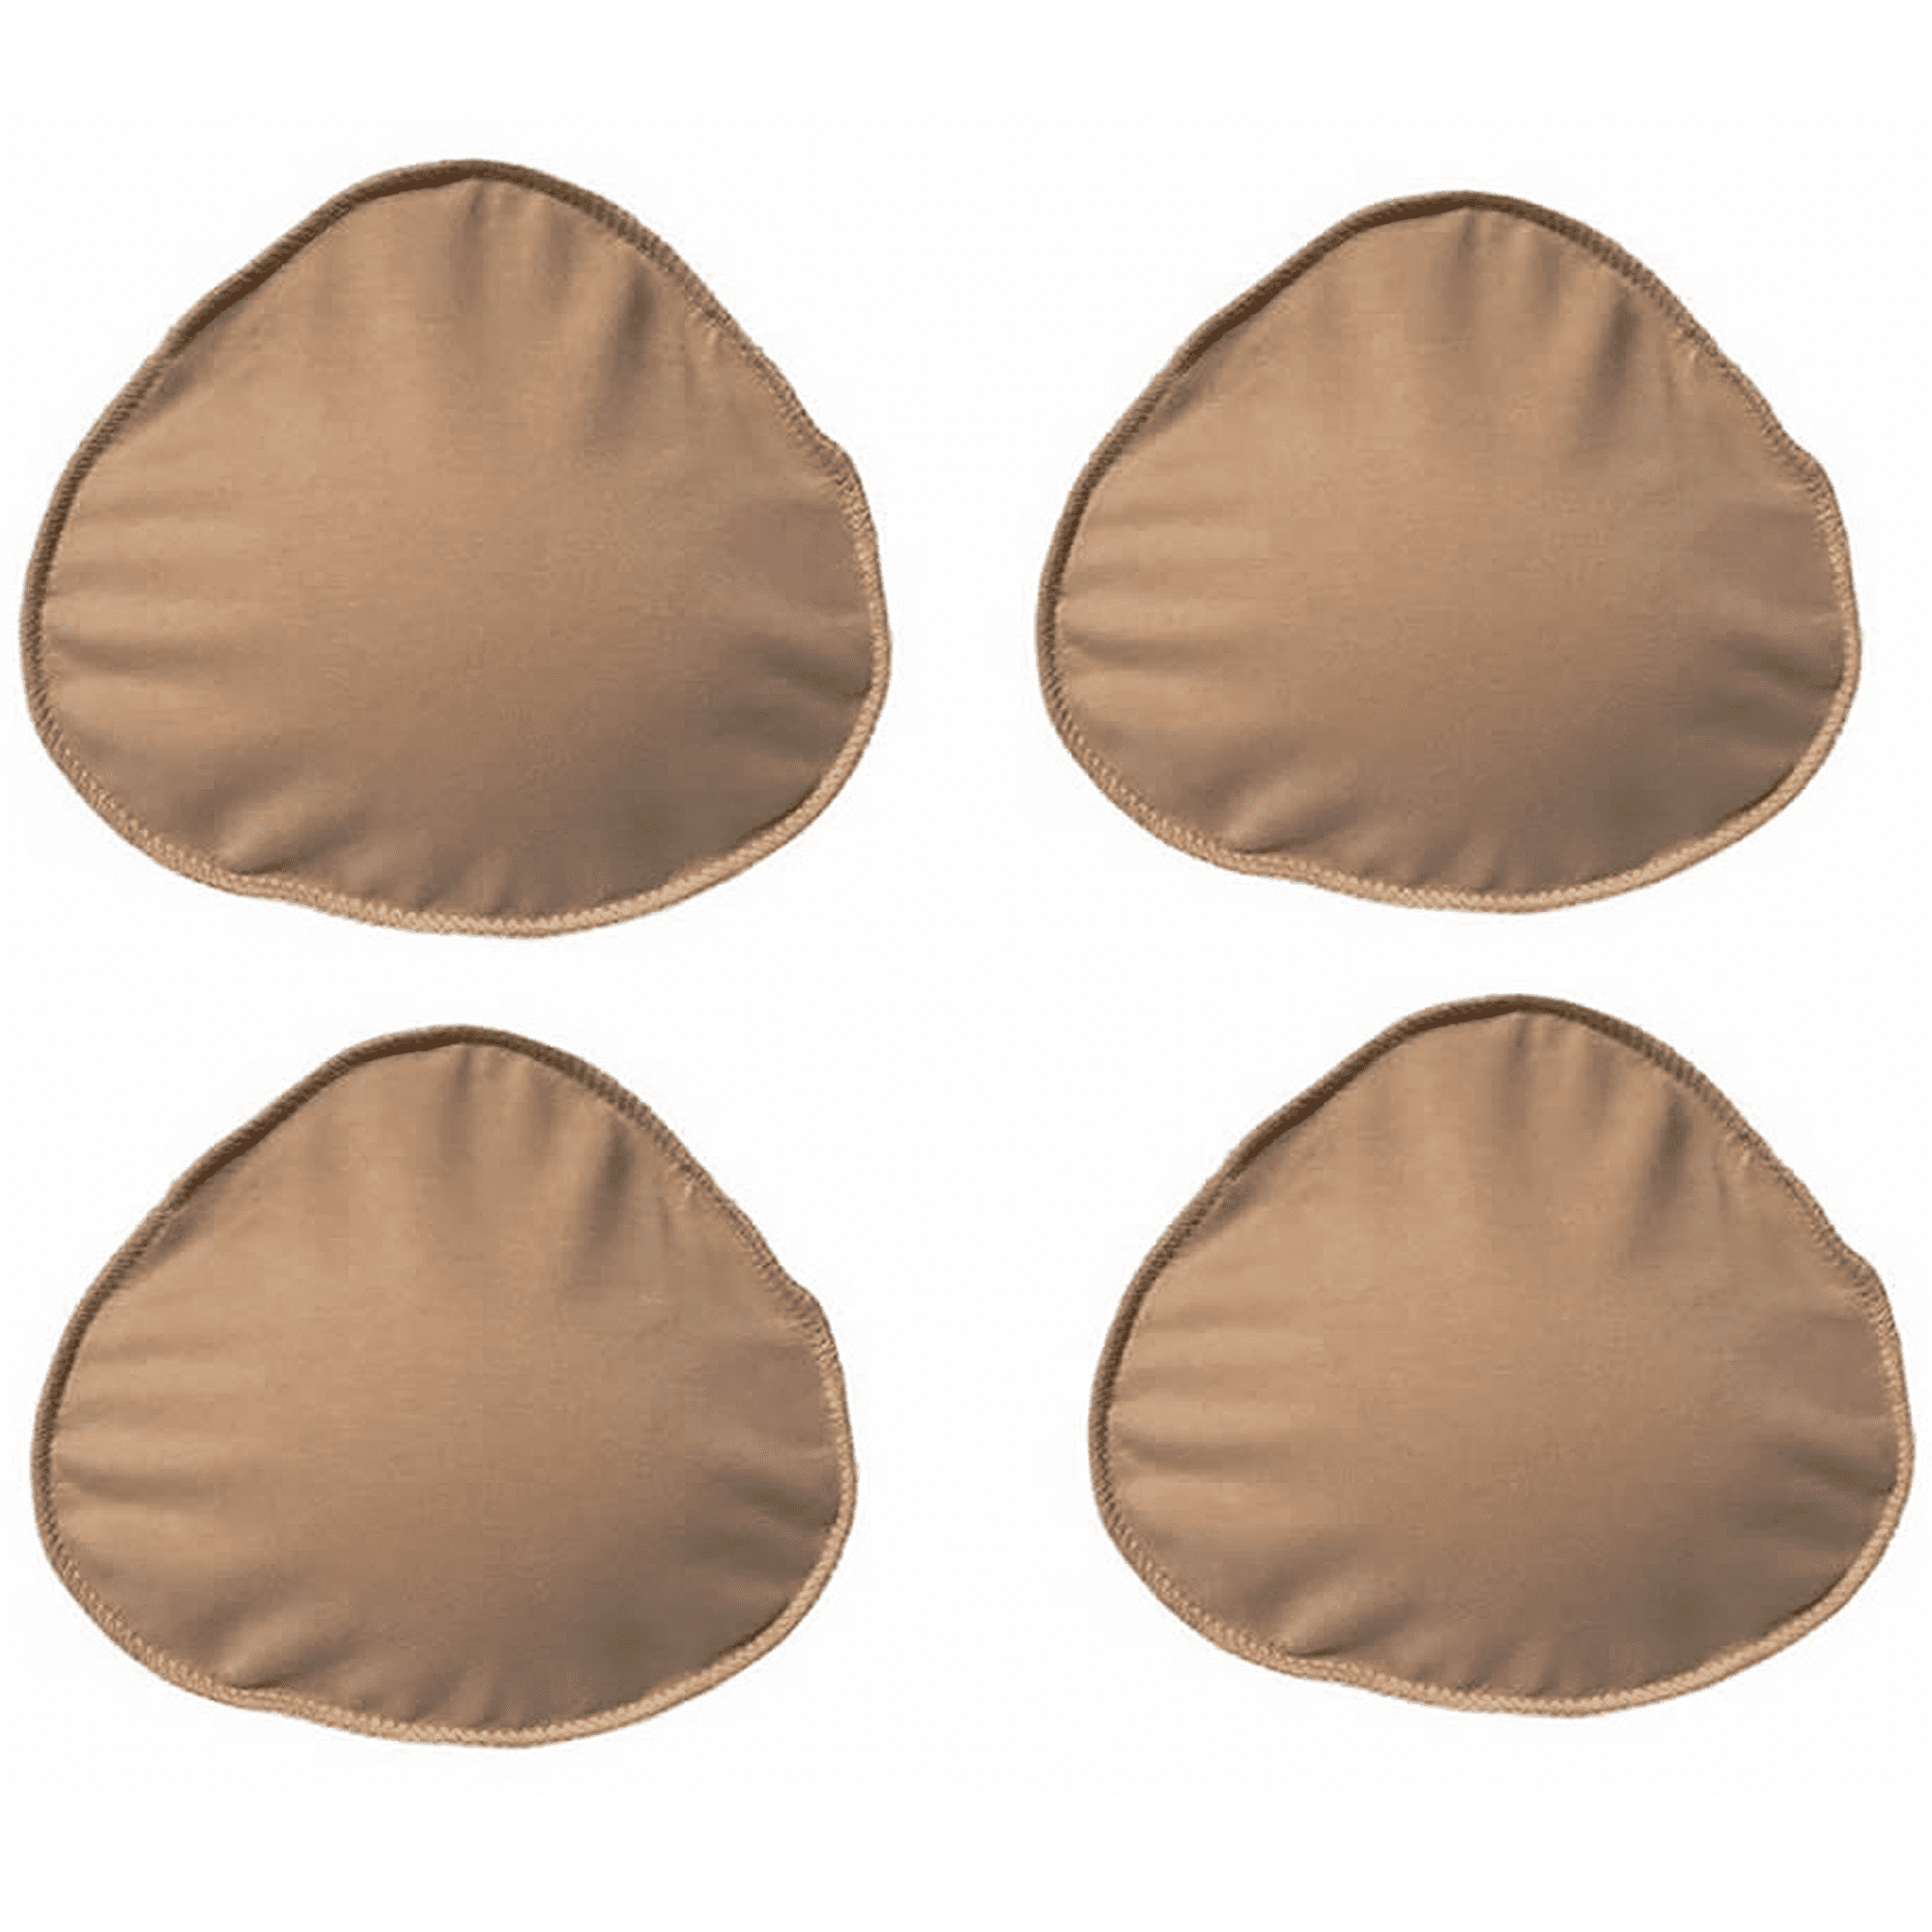  Silicone Fake Boobs Silicone Breast Forms Mastectomy